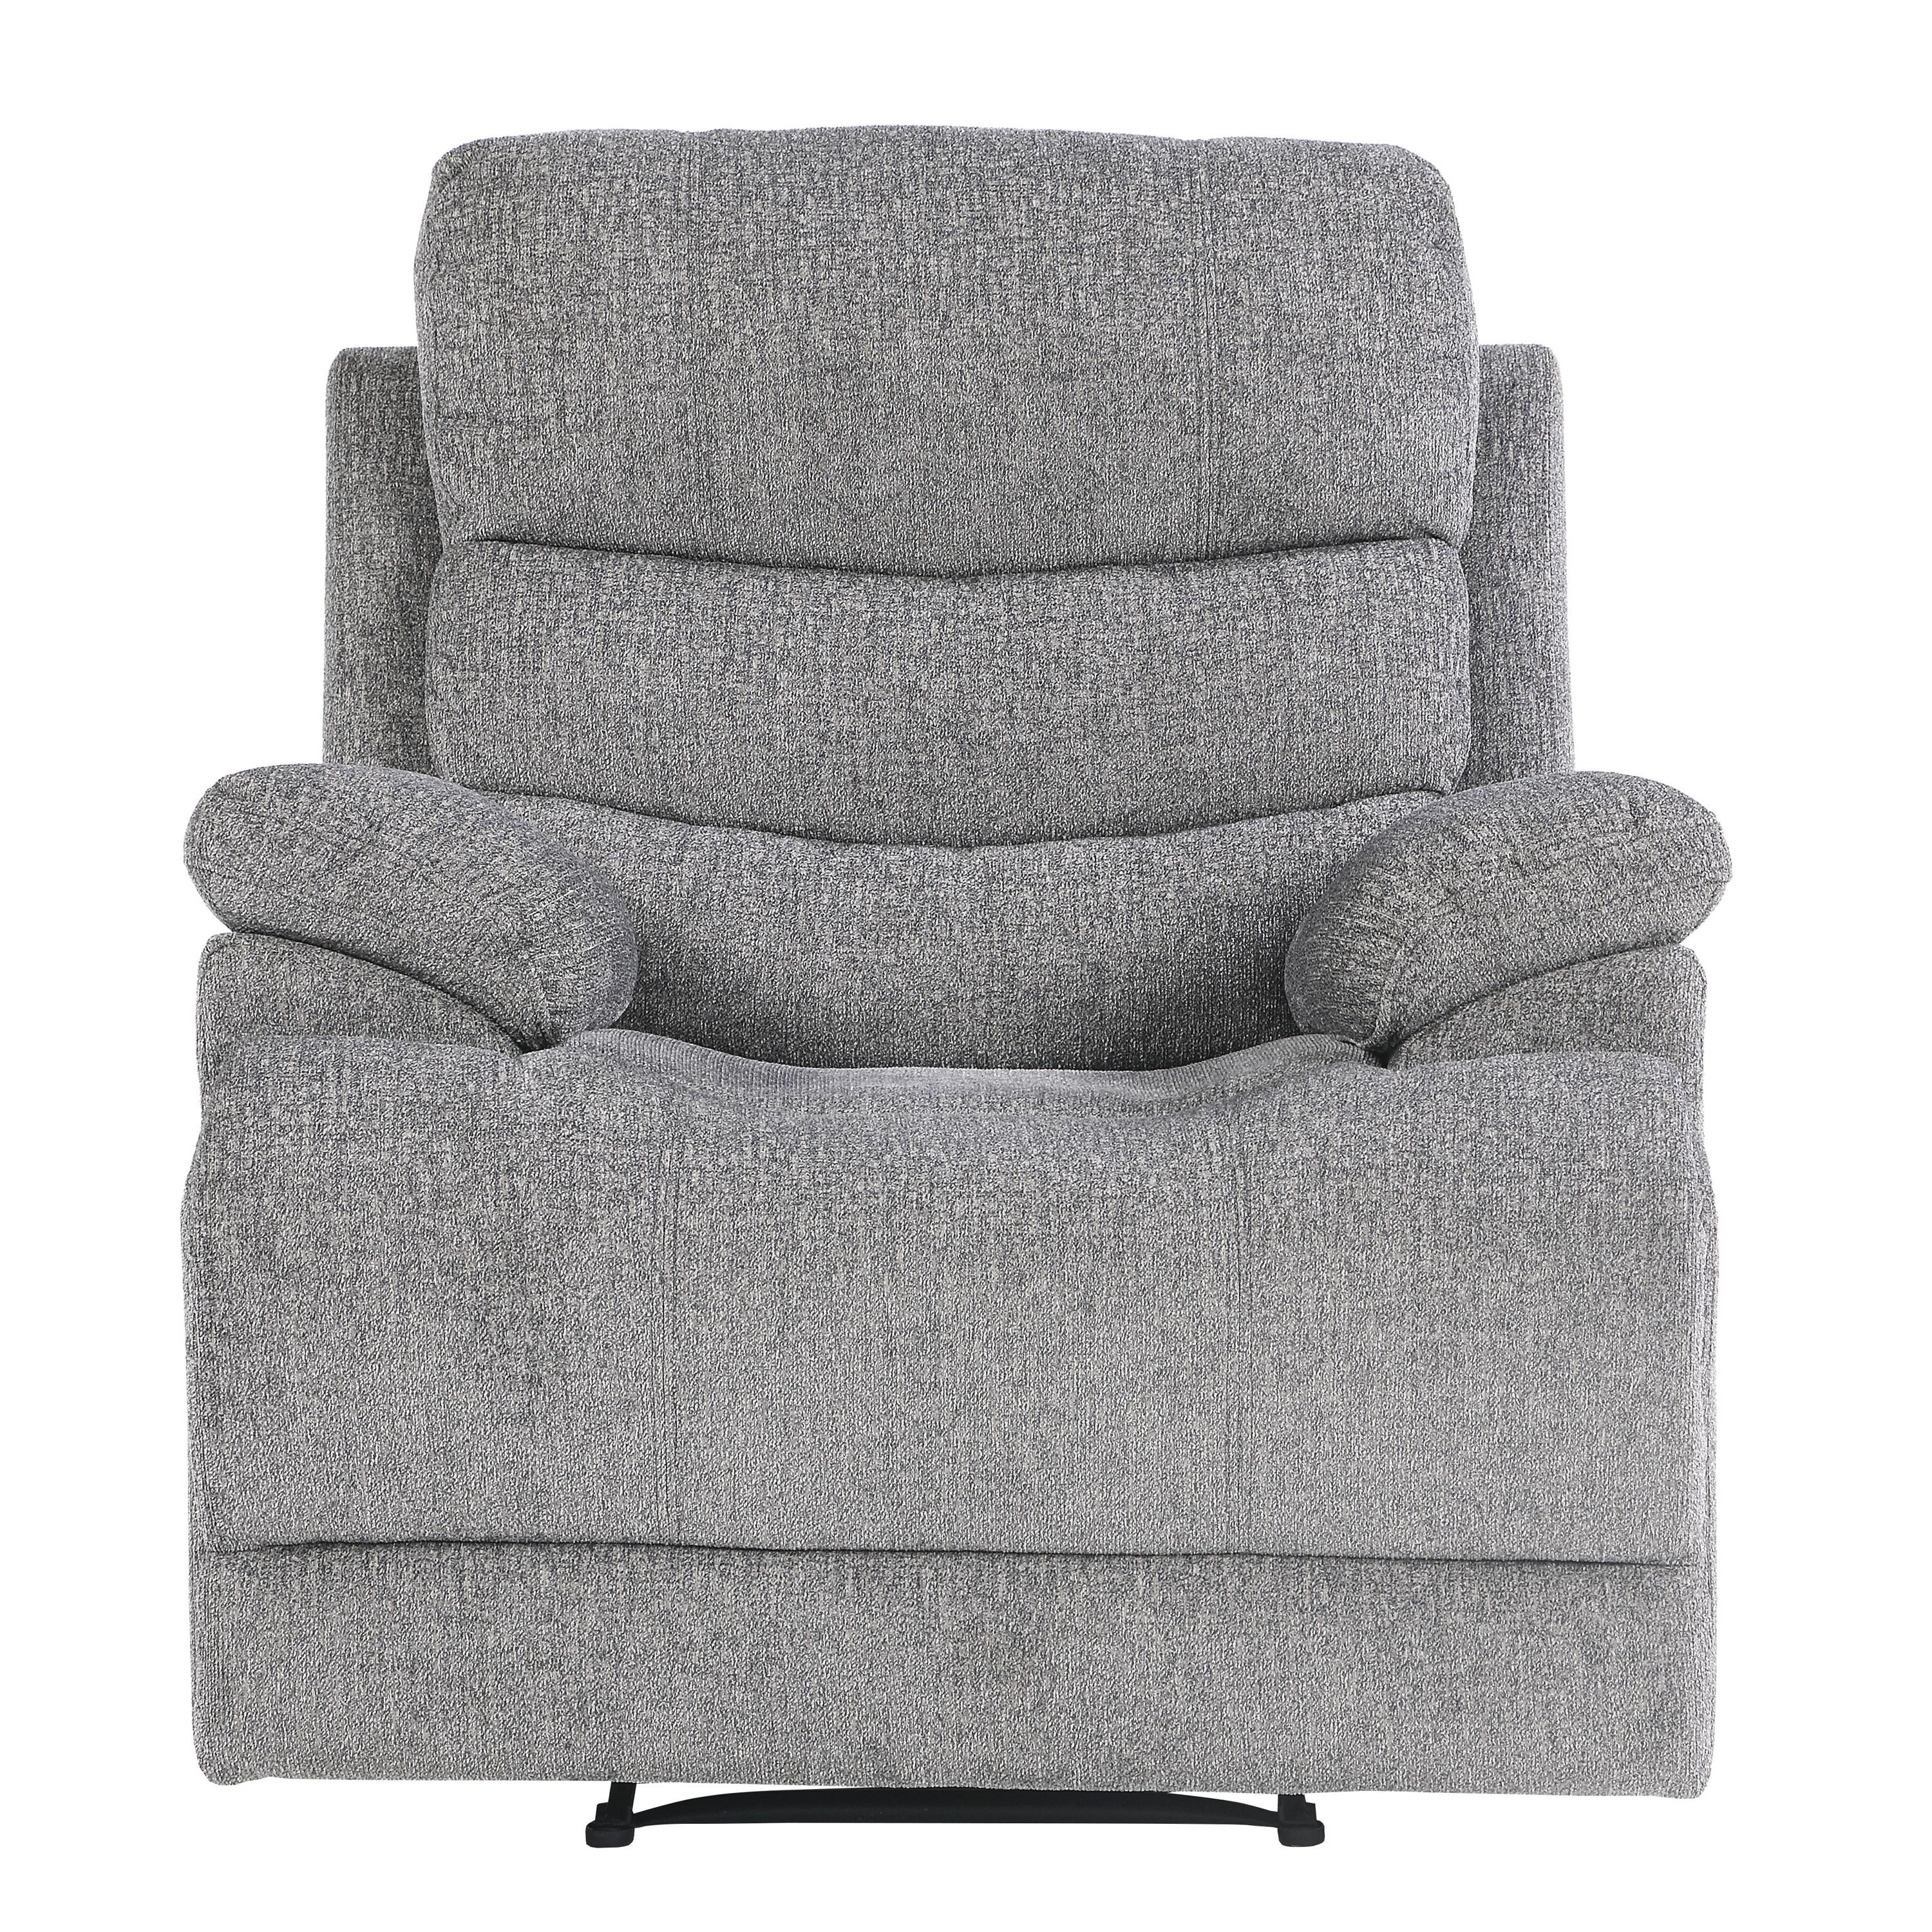 Transitional Power Reclining Chair 9422FS-1PWH Sherbrook 9422FS-1PWH in Gray Chenille